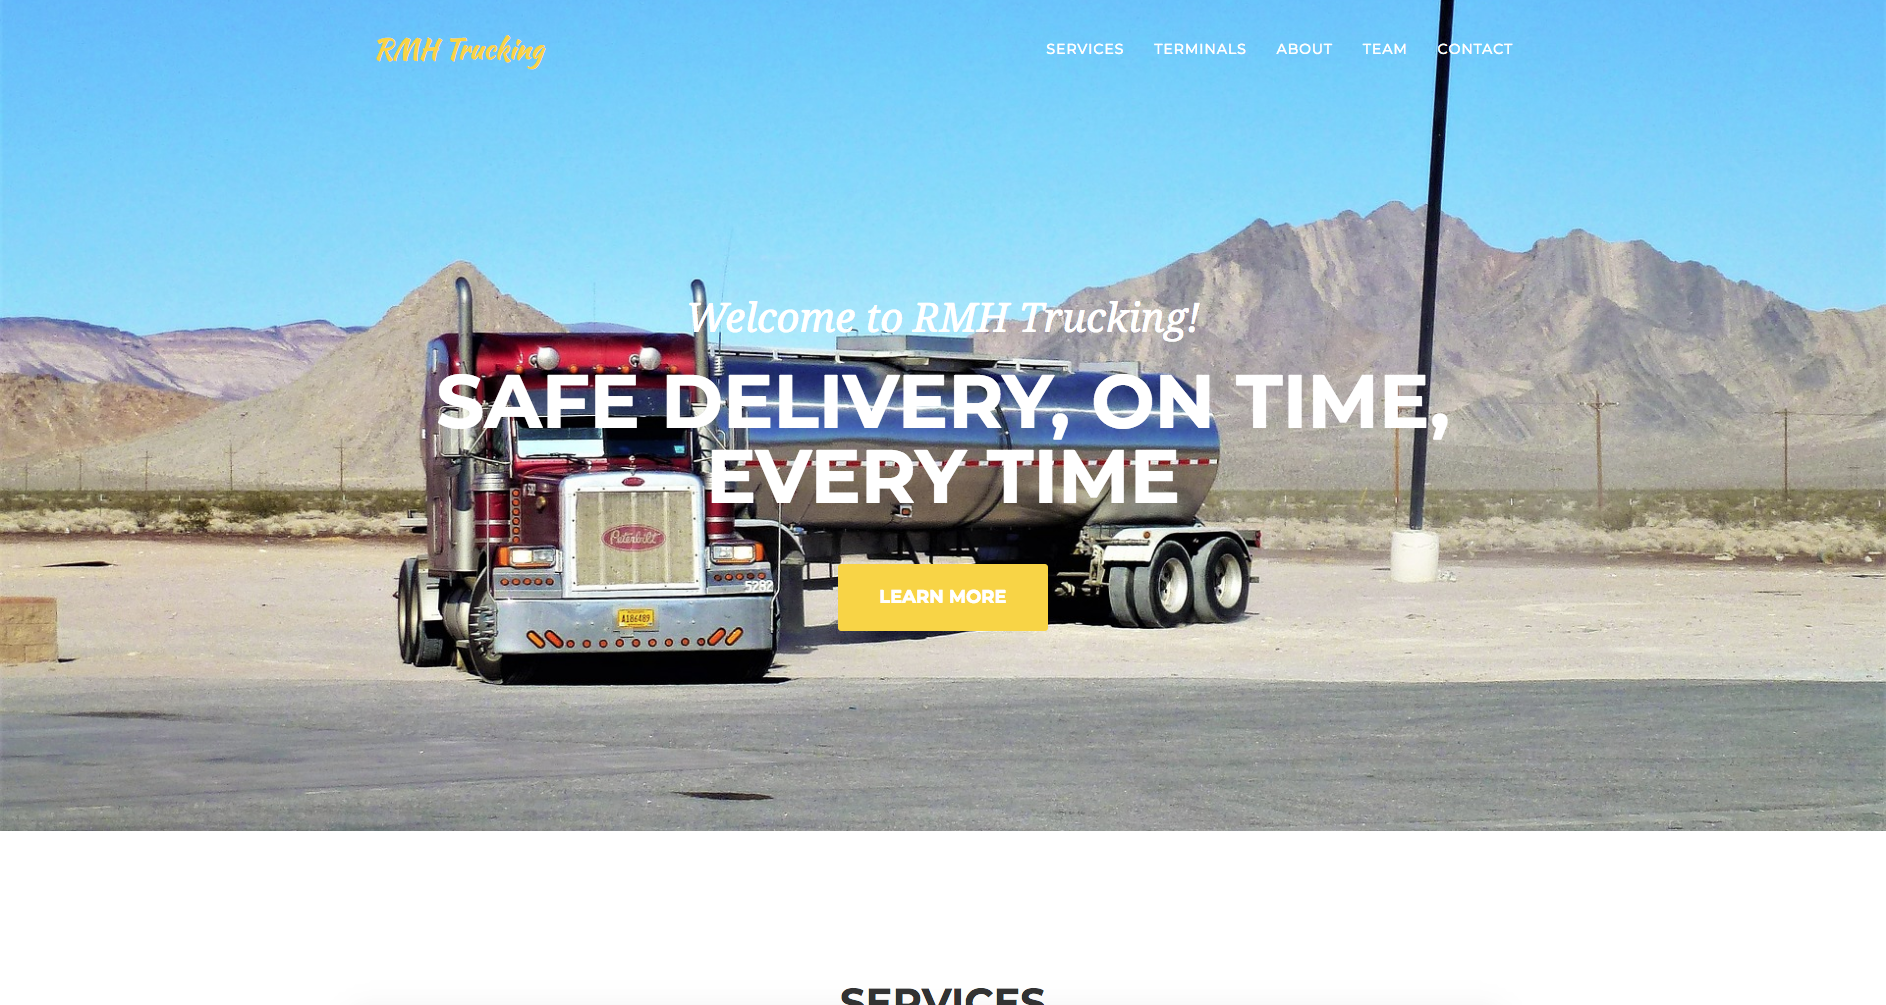 RMH Trucking Sample Site